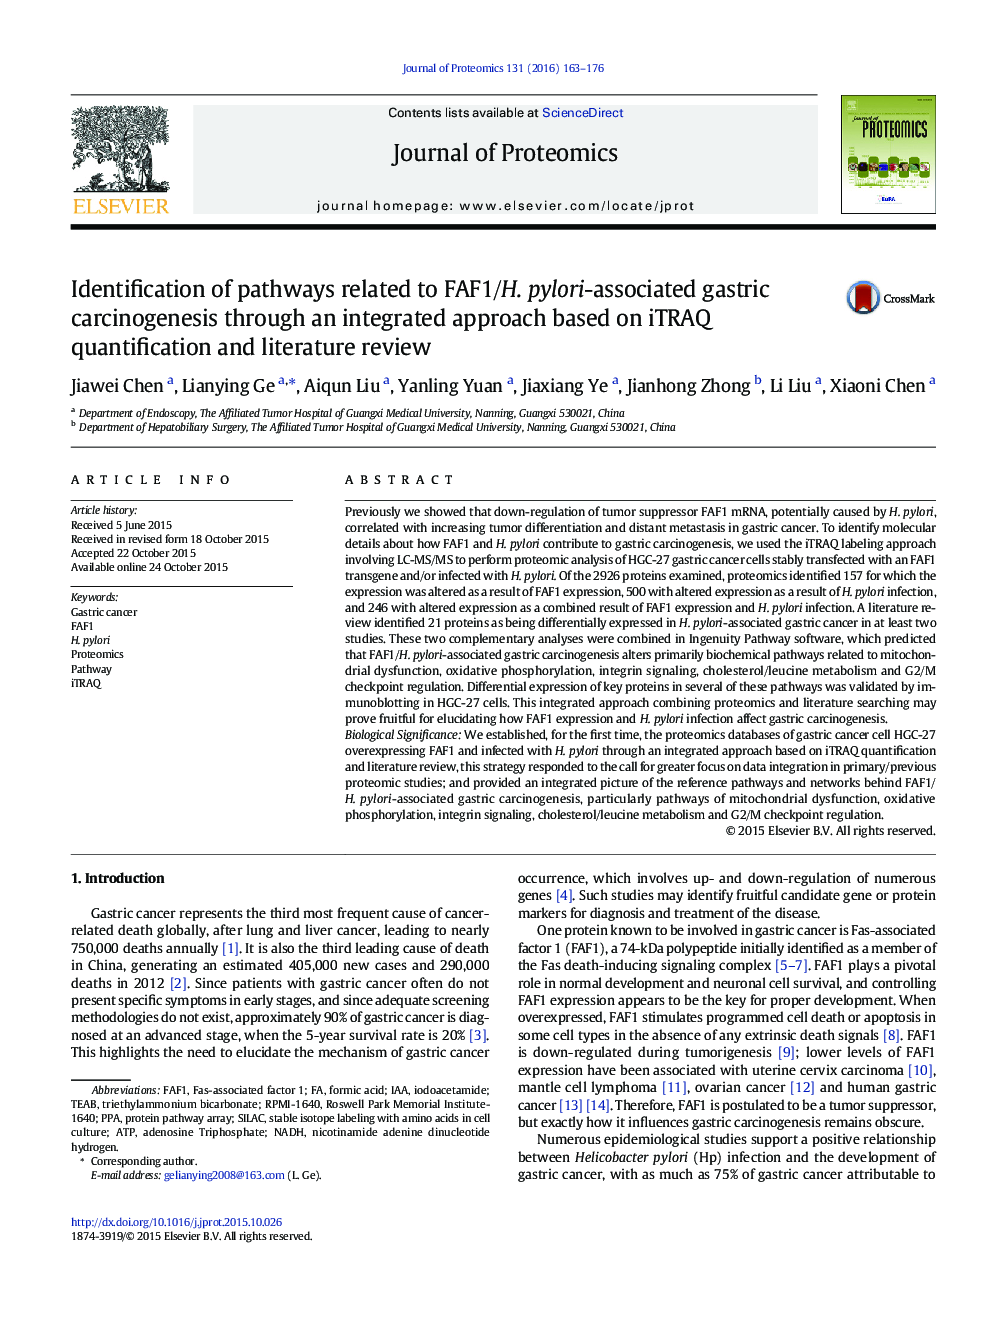 Identification of pathways related to FAF1/H. pylori-associated gastric carcinogenesis through an integrated approach based on iTRAQ quantification and literature review